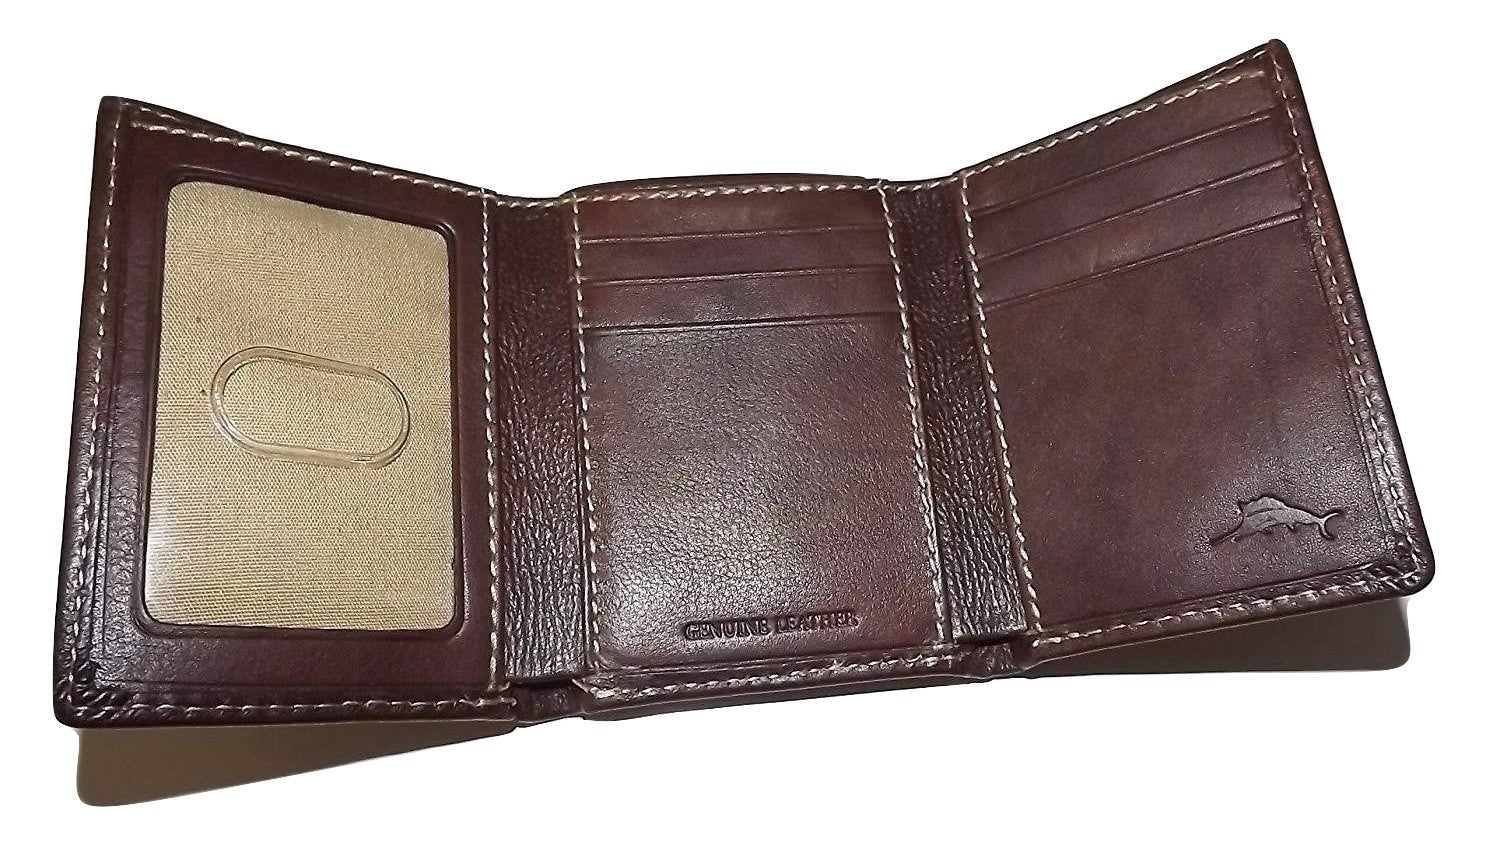 tommy bahama trifold wallet